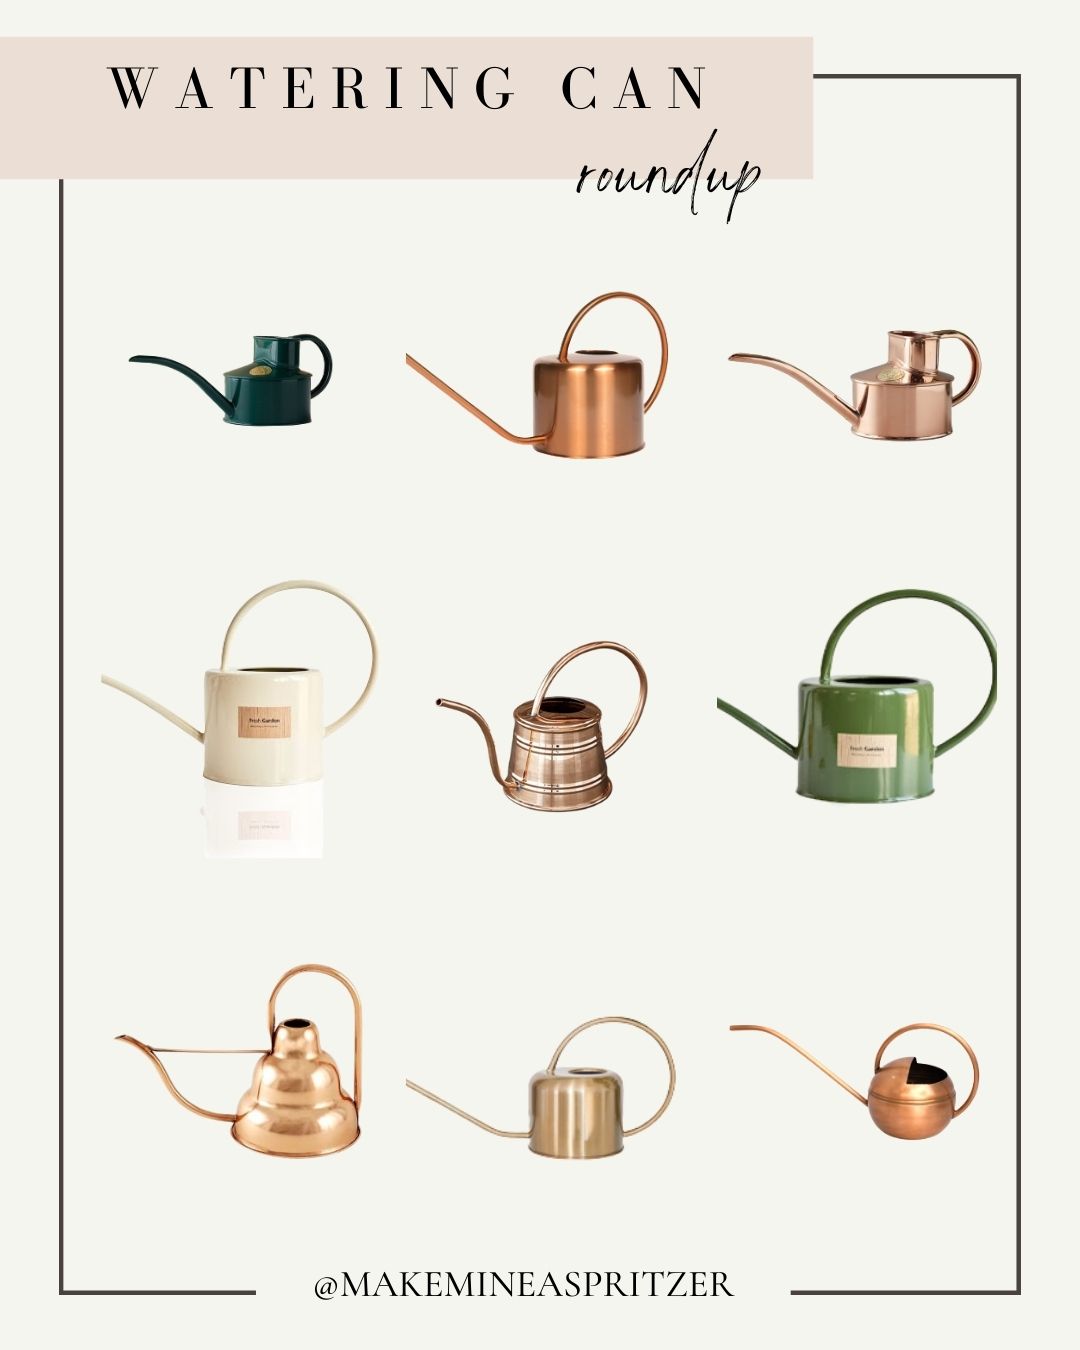 Watering Can roundup collage.